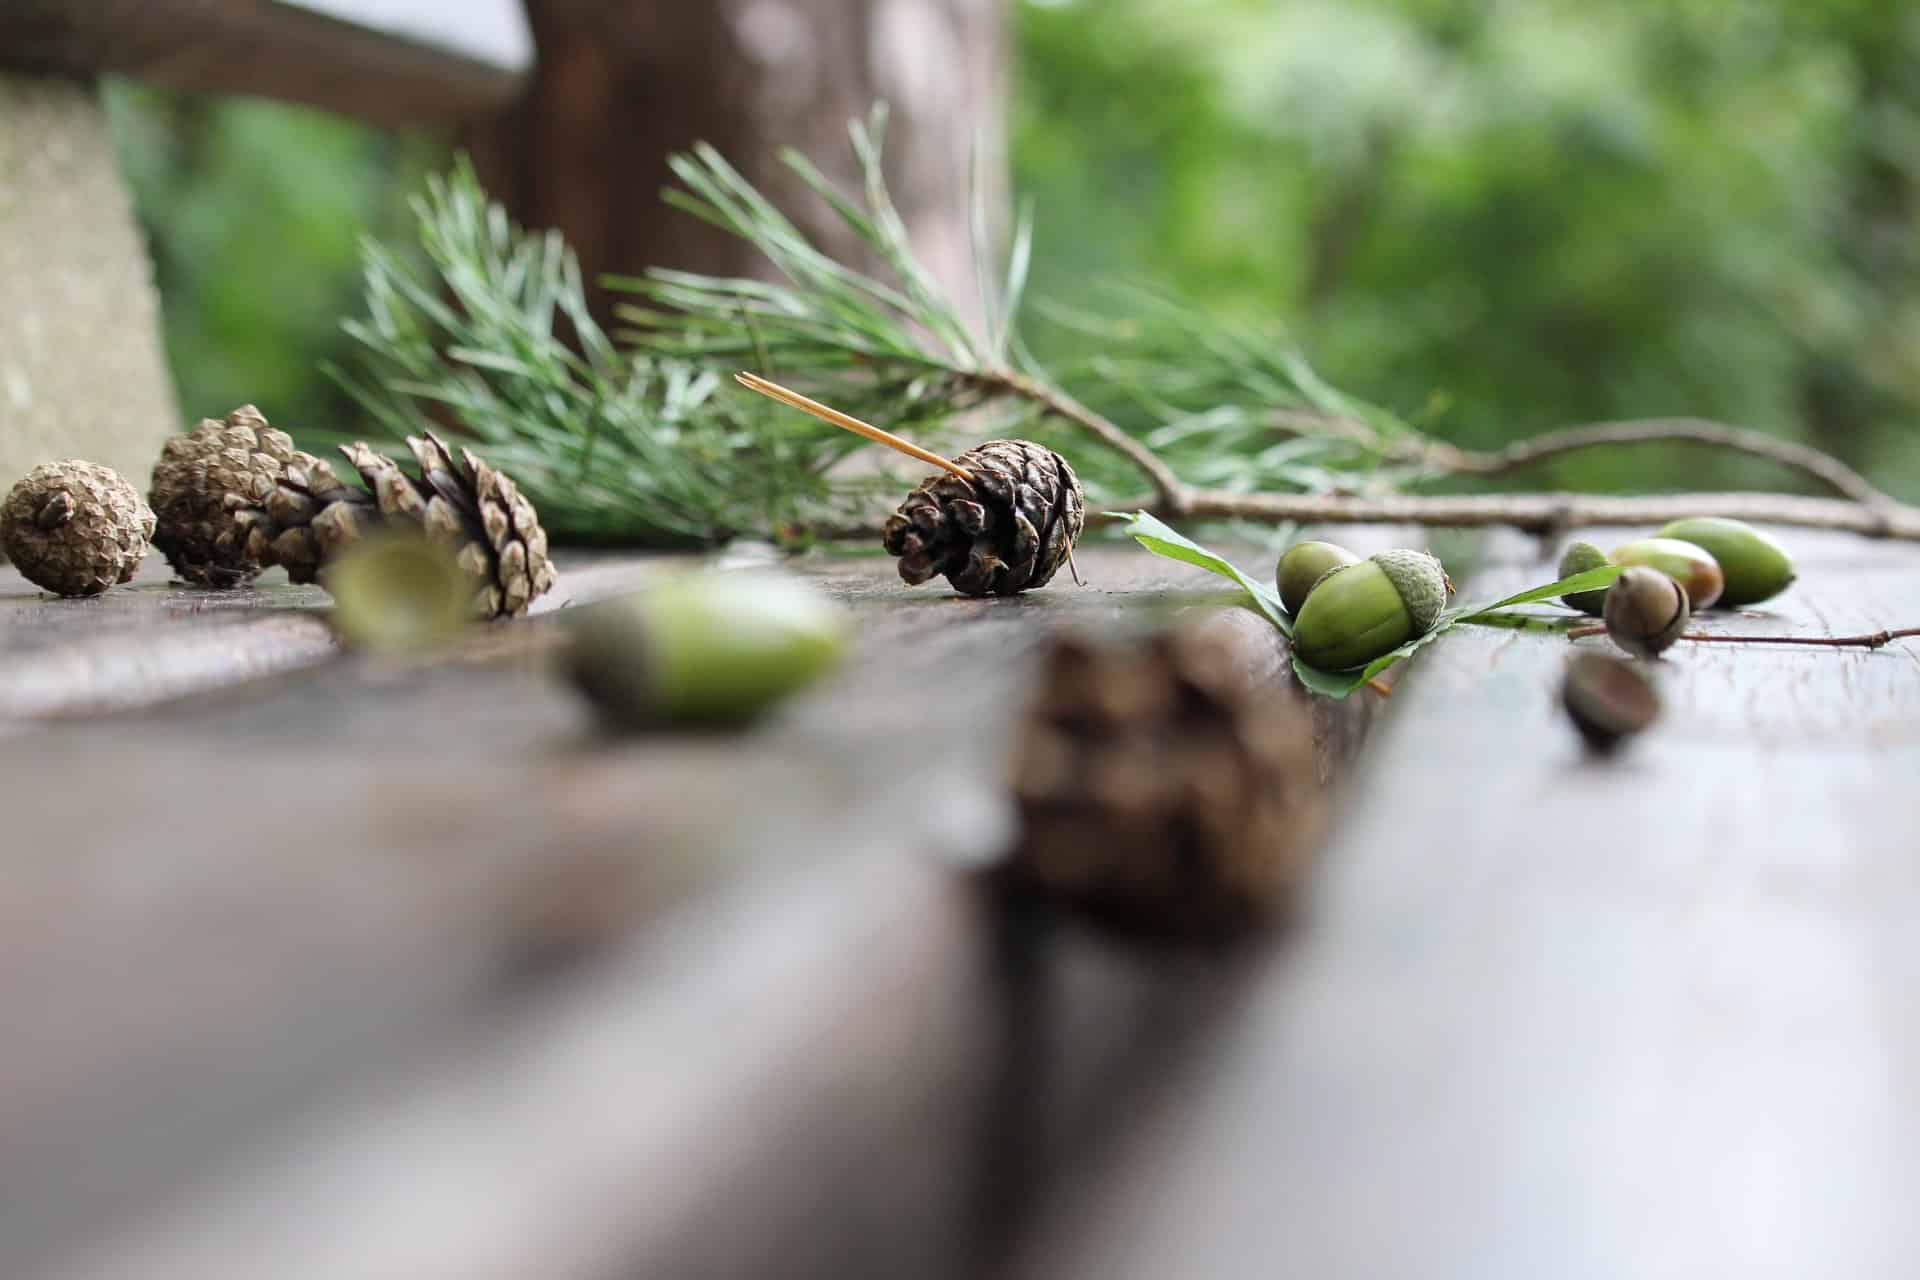 Pine cone and seeds on brown wooden table.